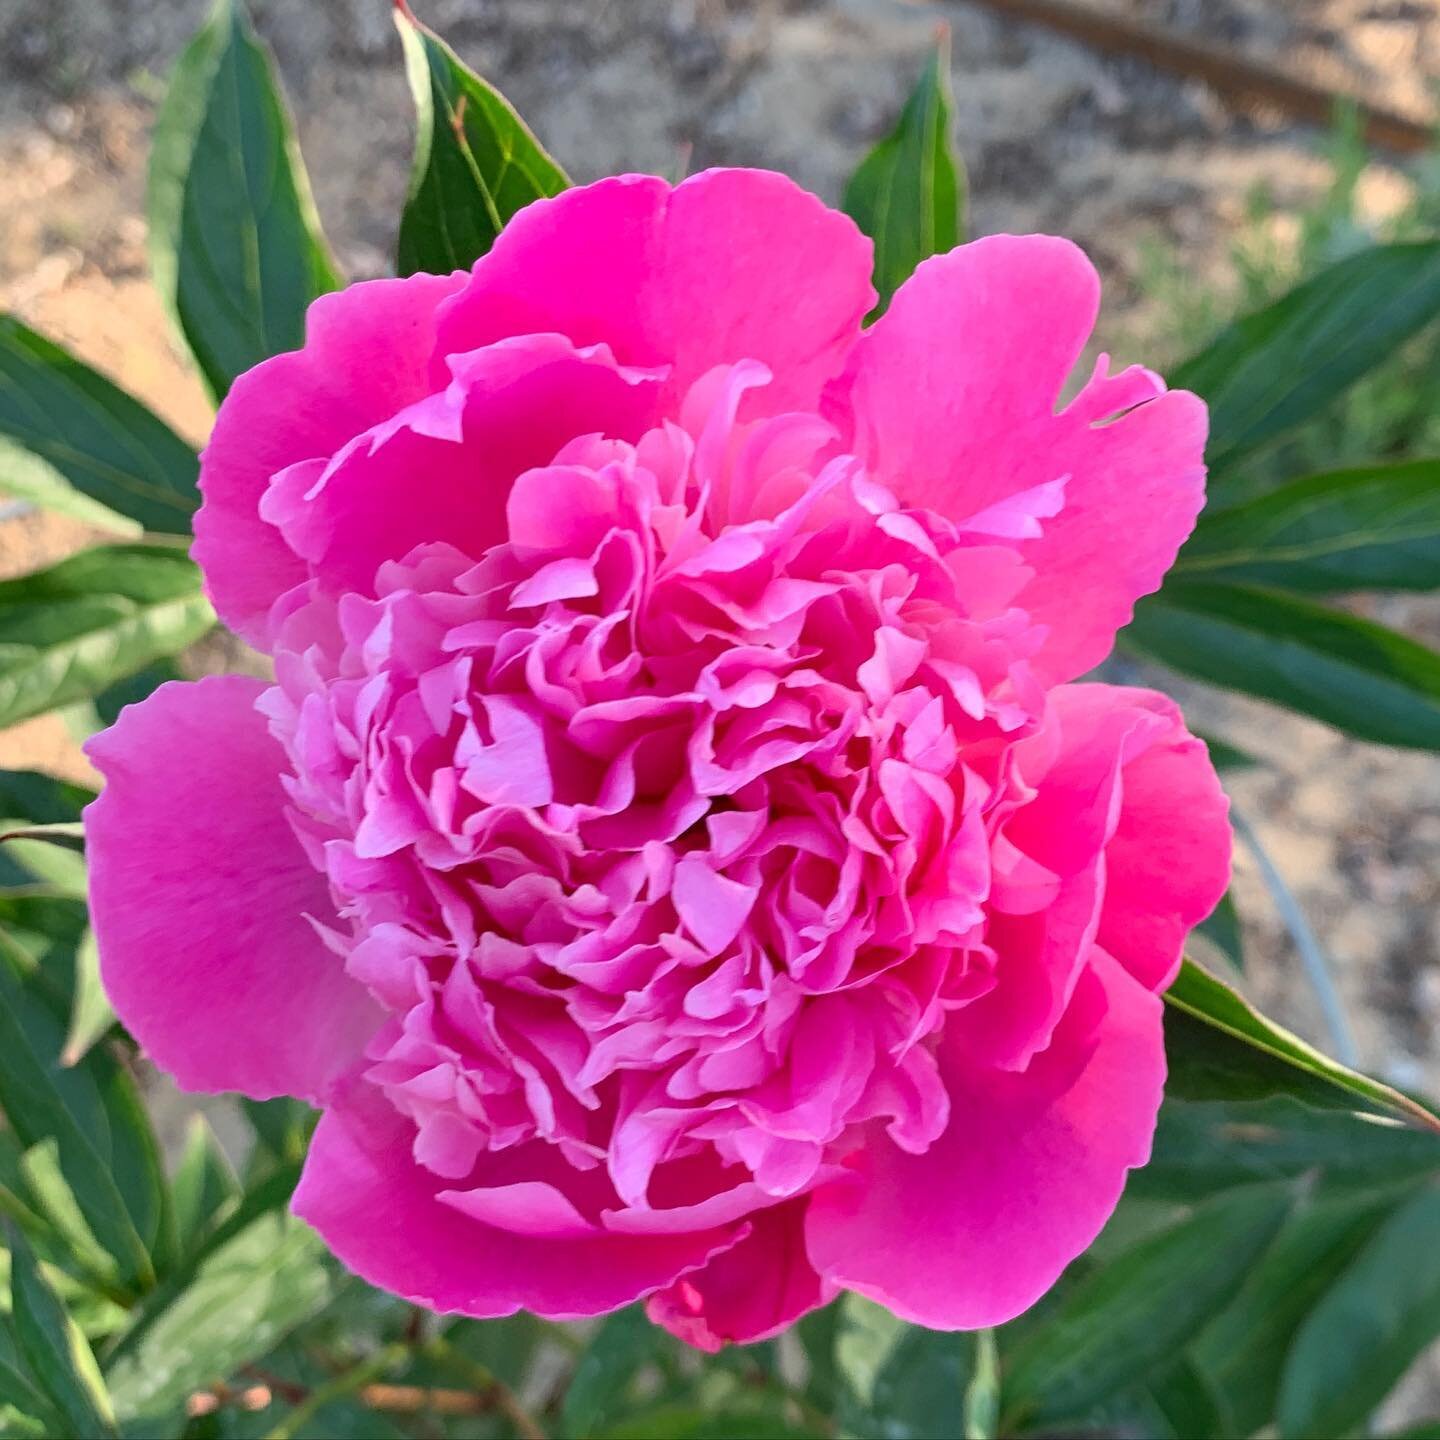 The first peony has arrived! So happy to see it! 😍